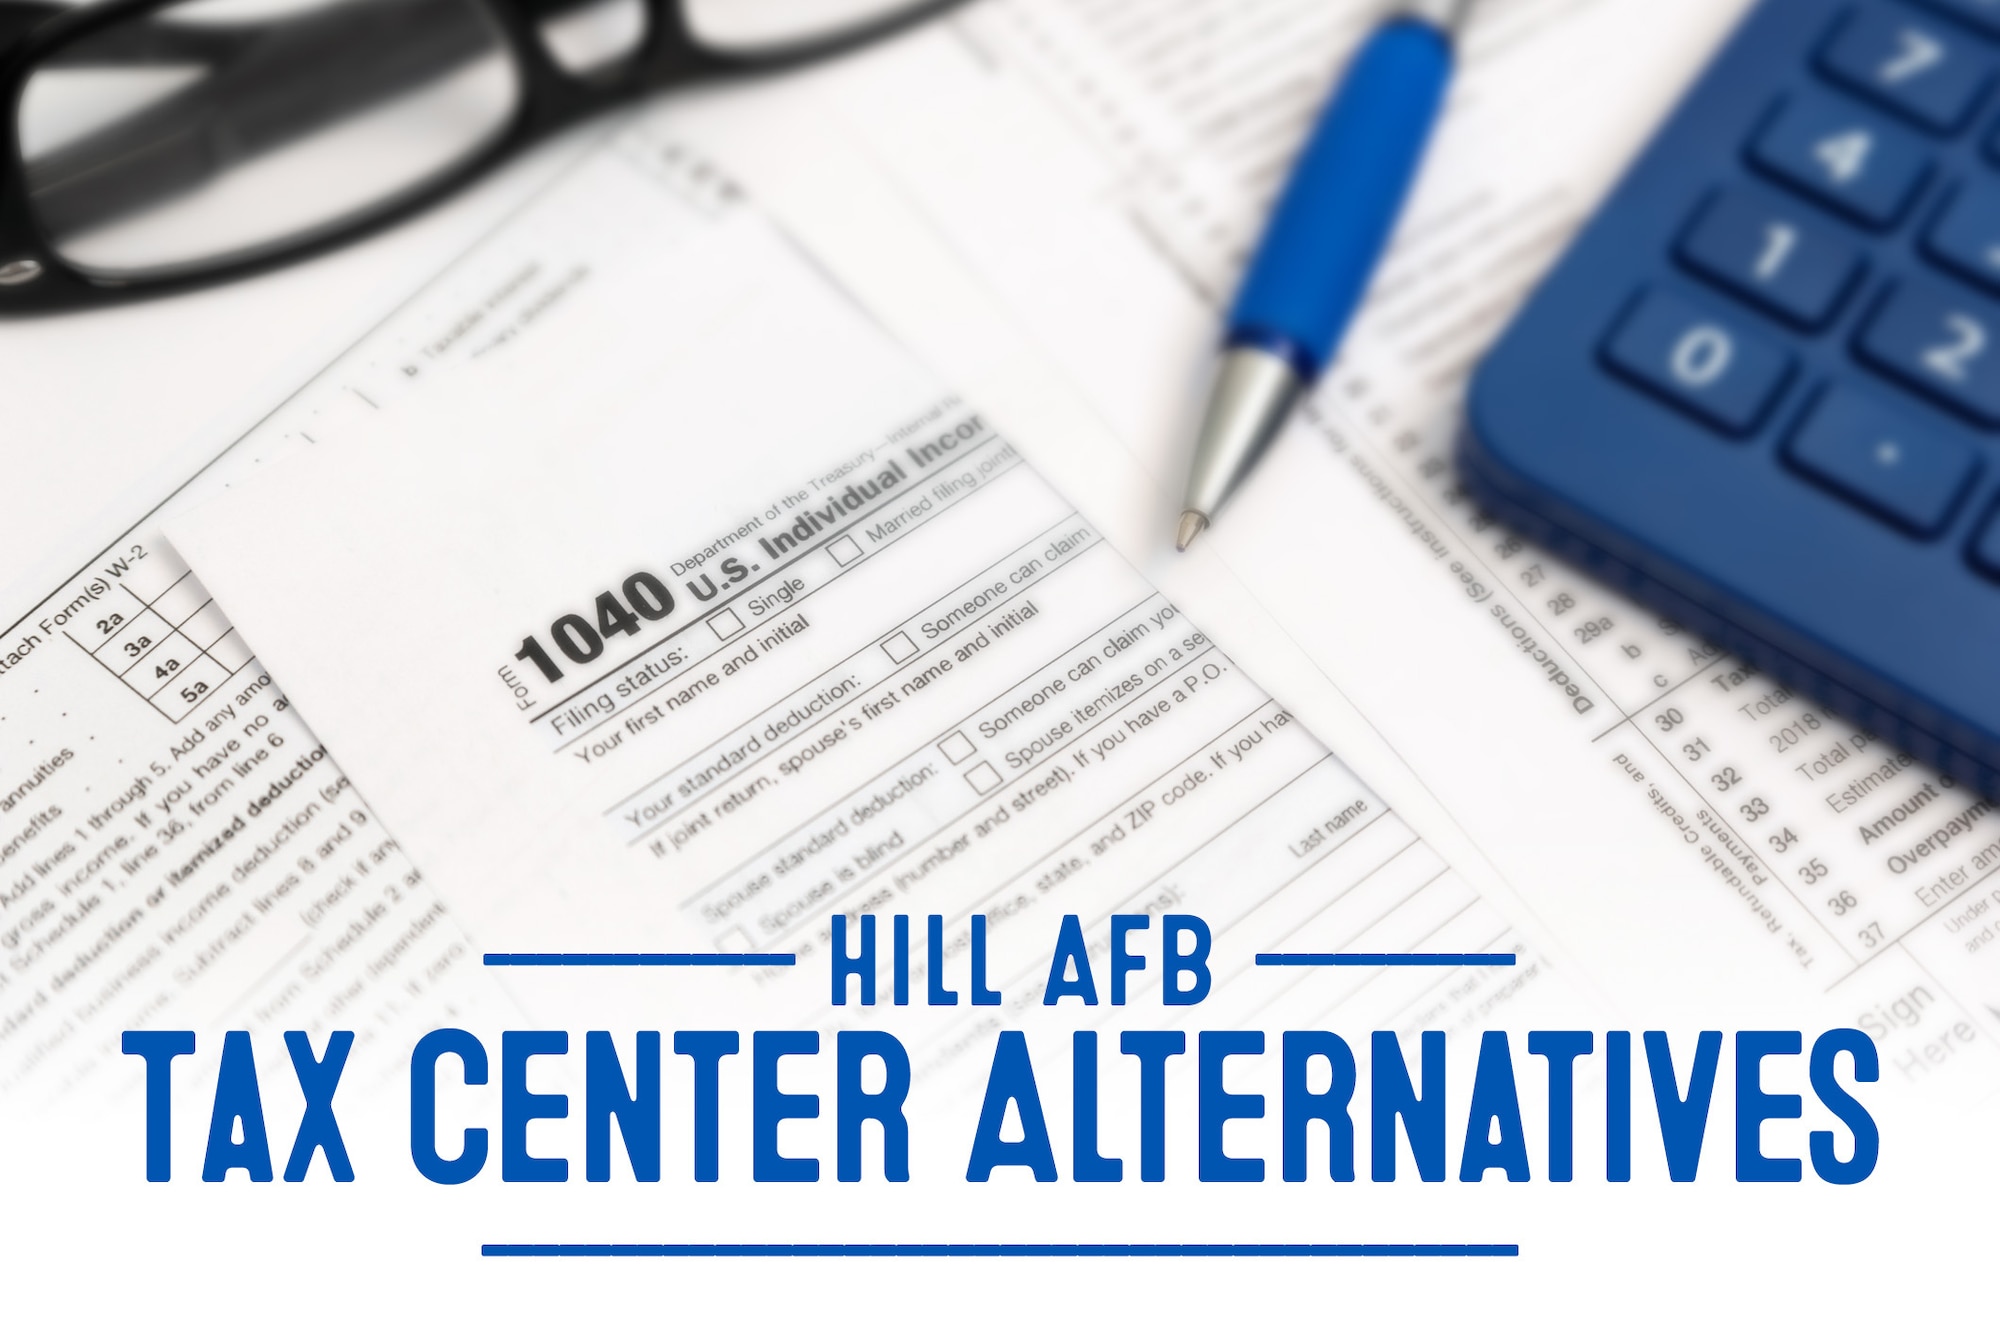 Glasses and a calculator sitting on top of a 1040 tax form with the words "Hill AFB Tax Center Alternatives" highlighted in blue at the bottom of the image.